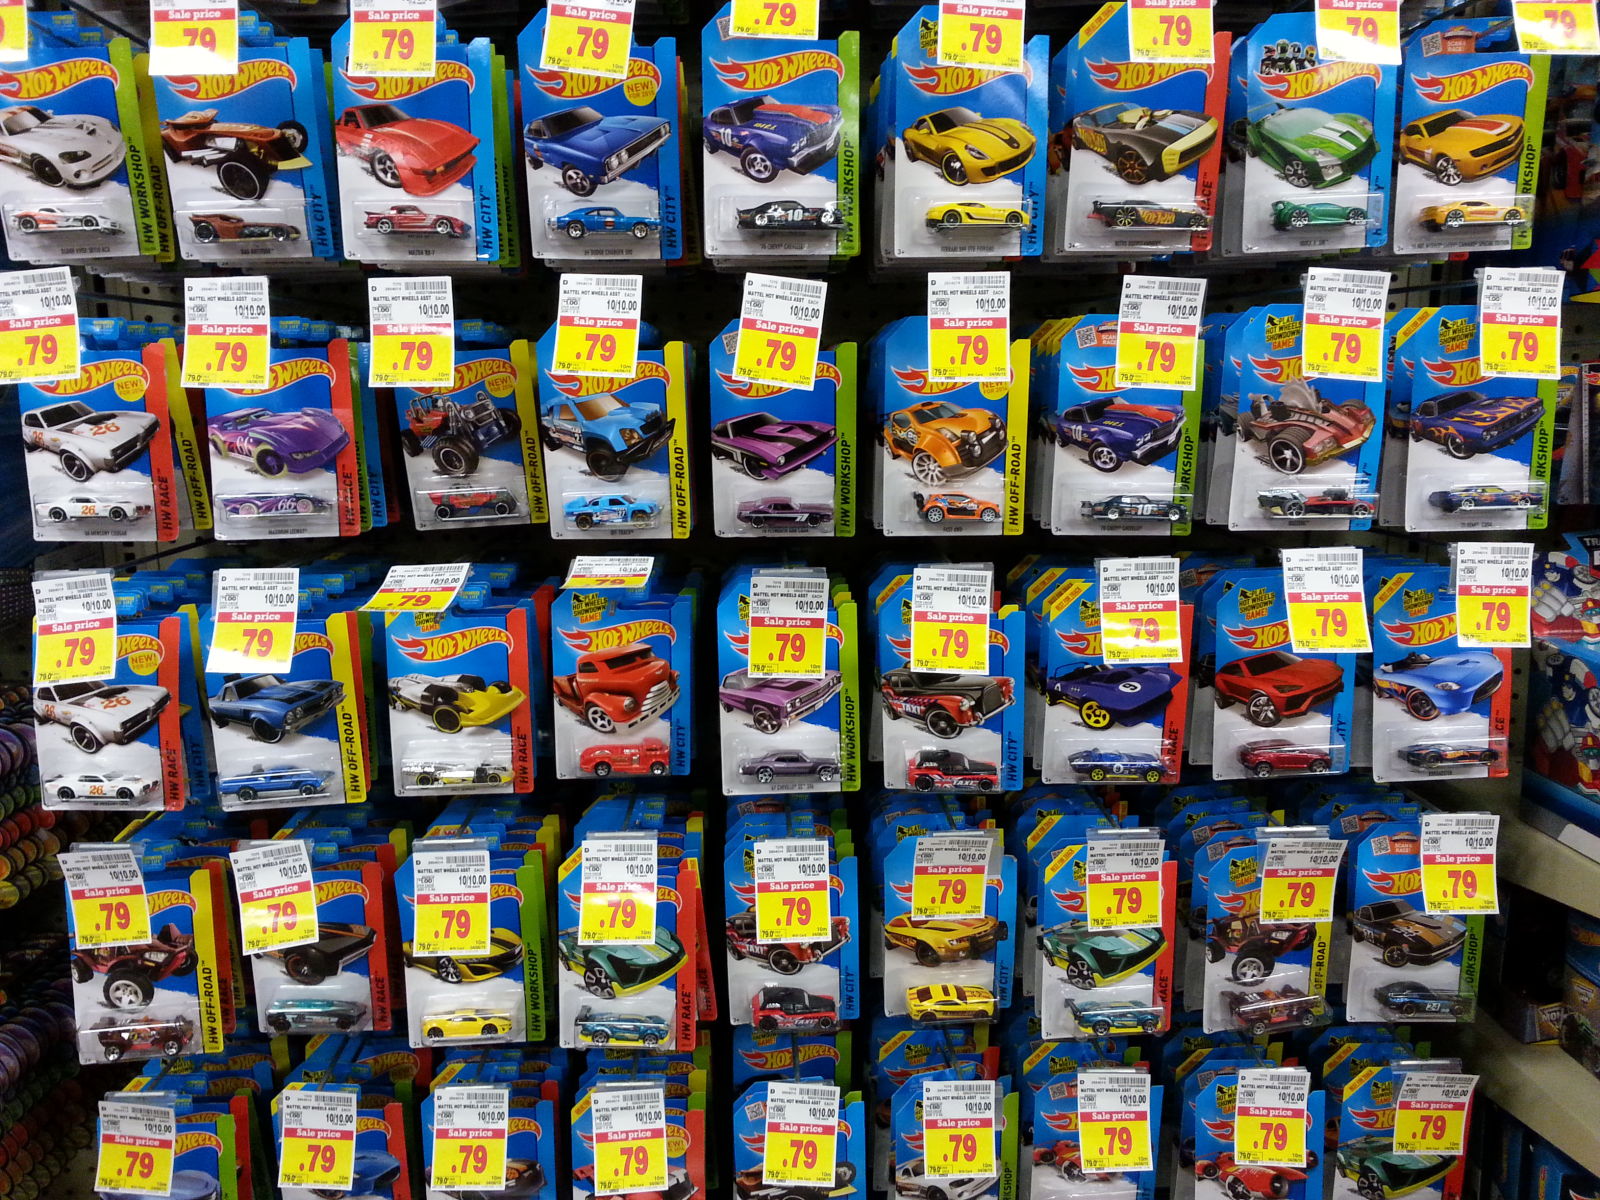 Illustration for article titled HotWheels at Kroger are $0.79